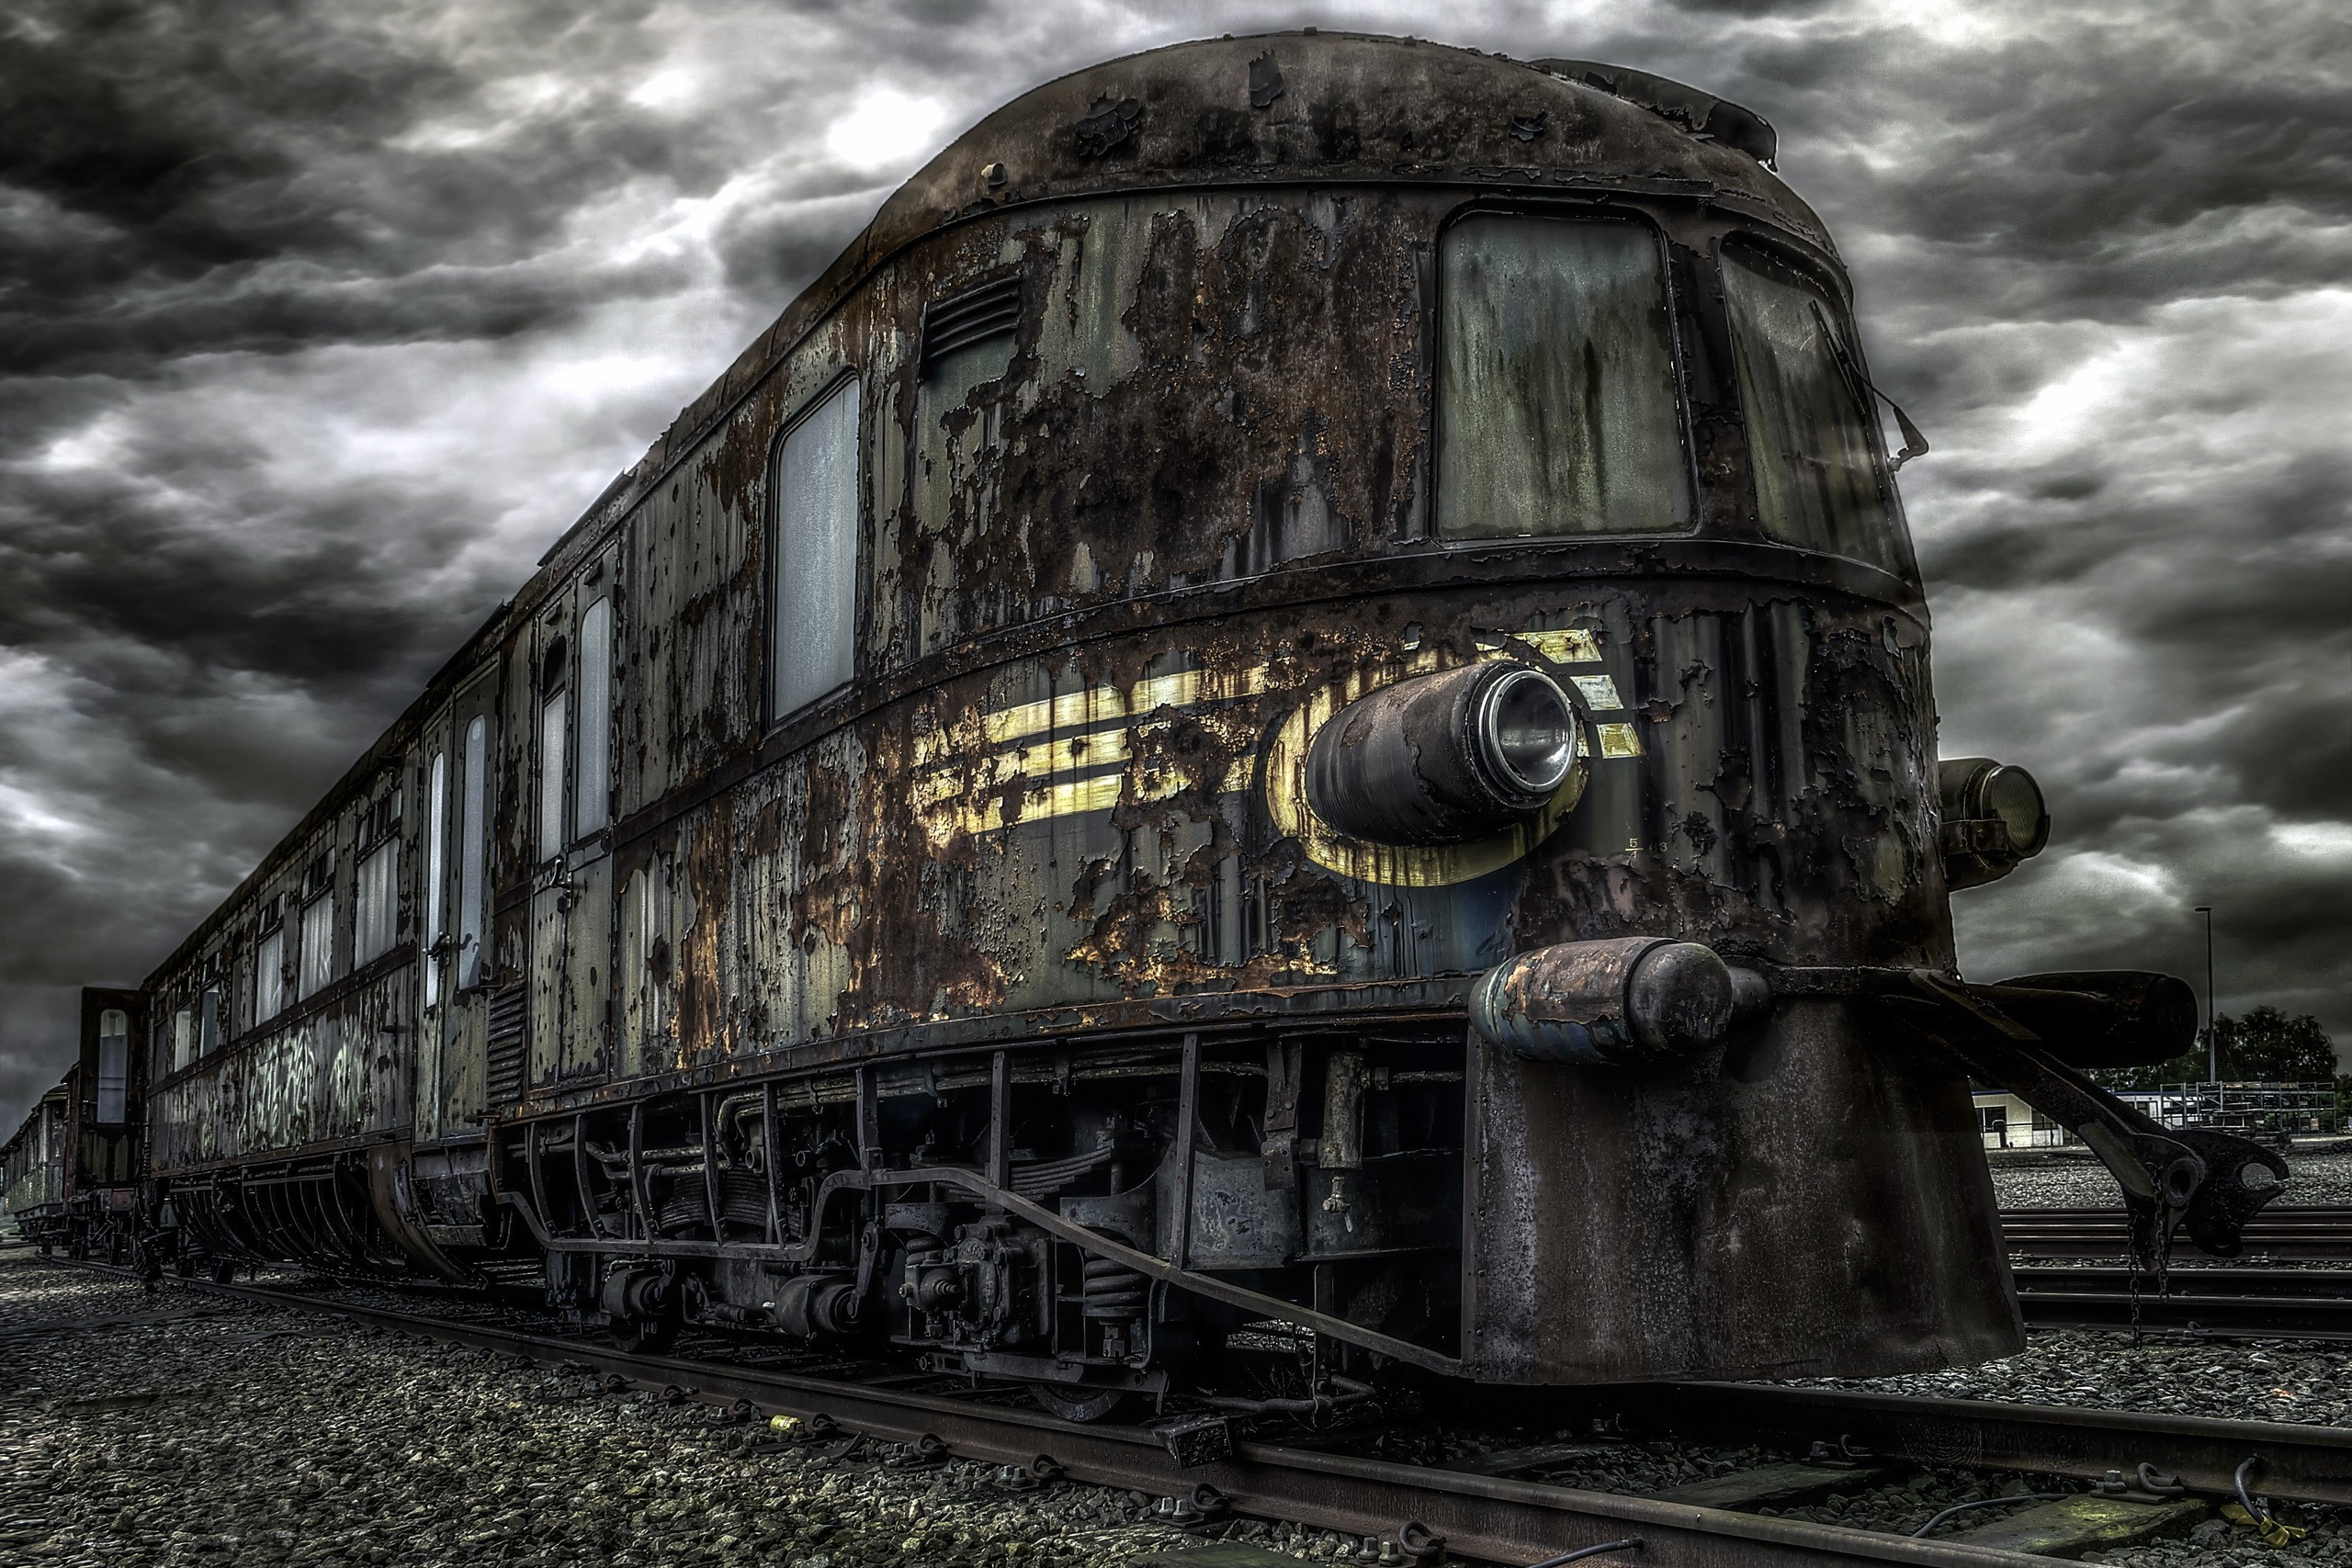 General 2560x1707 train vehicle abandoned old HDR railway overcast wreck